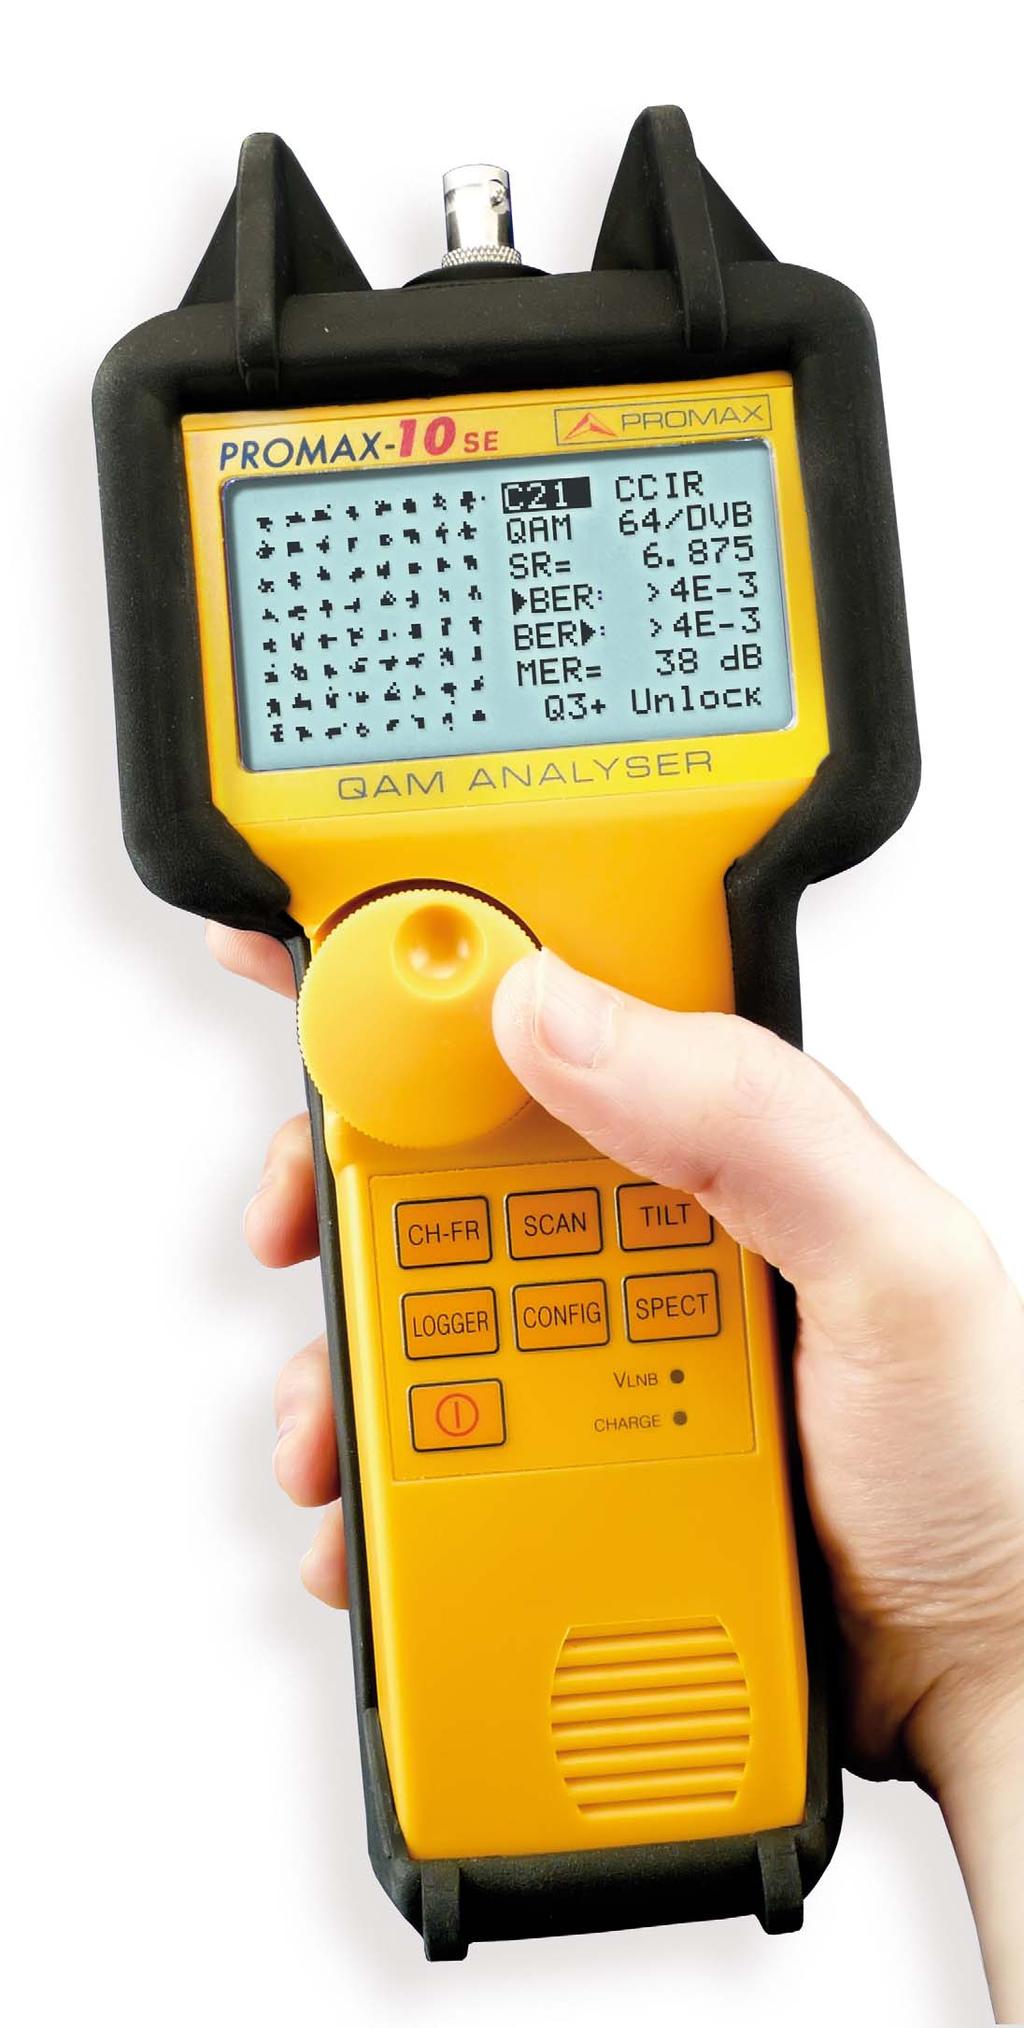 PROMAX-10 SE 50 Years Edition We are proud to introduce a new version of our world-wide renown PROMAX-10 CATV Analyser.